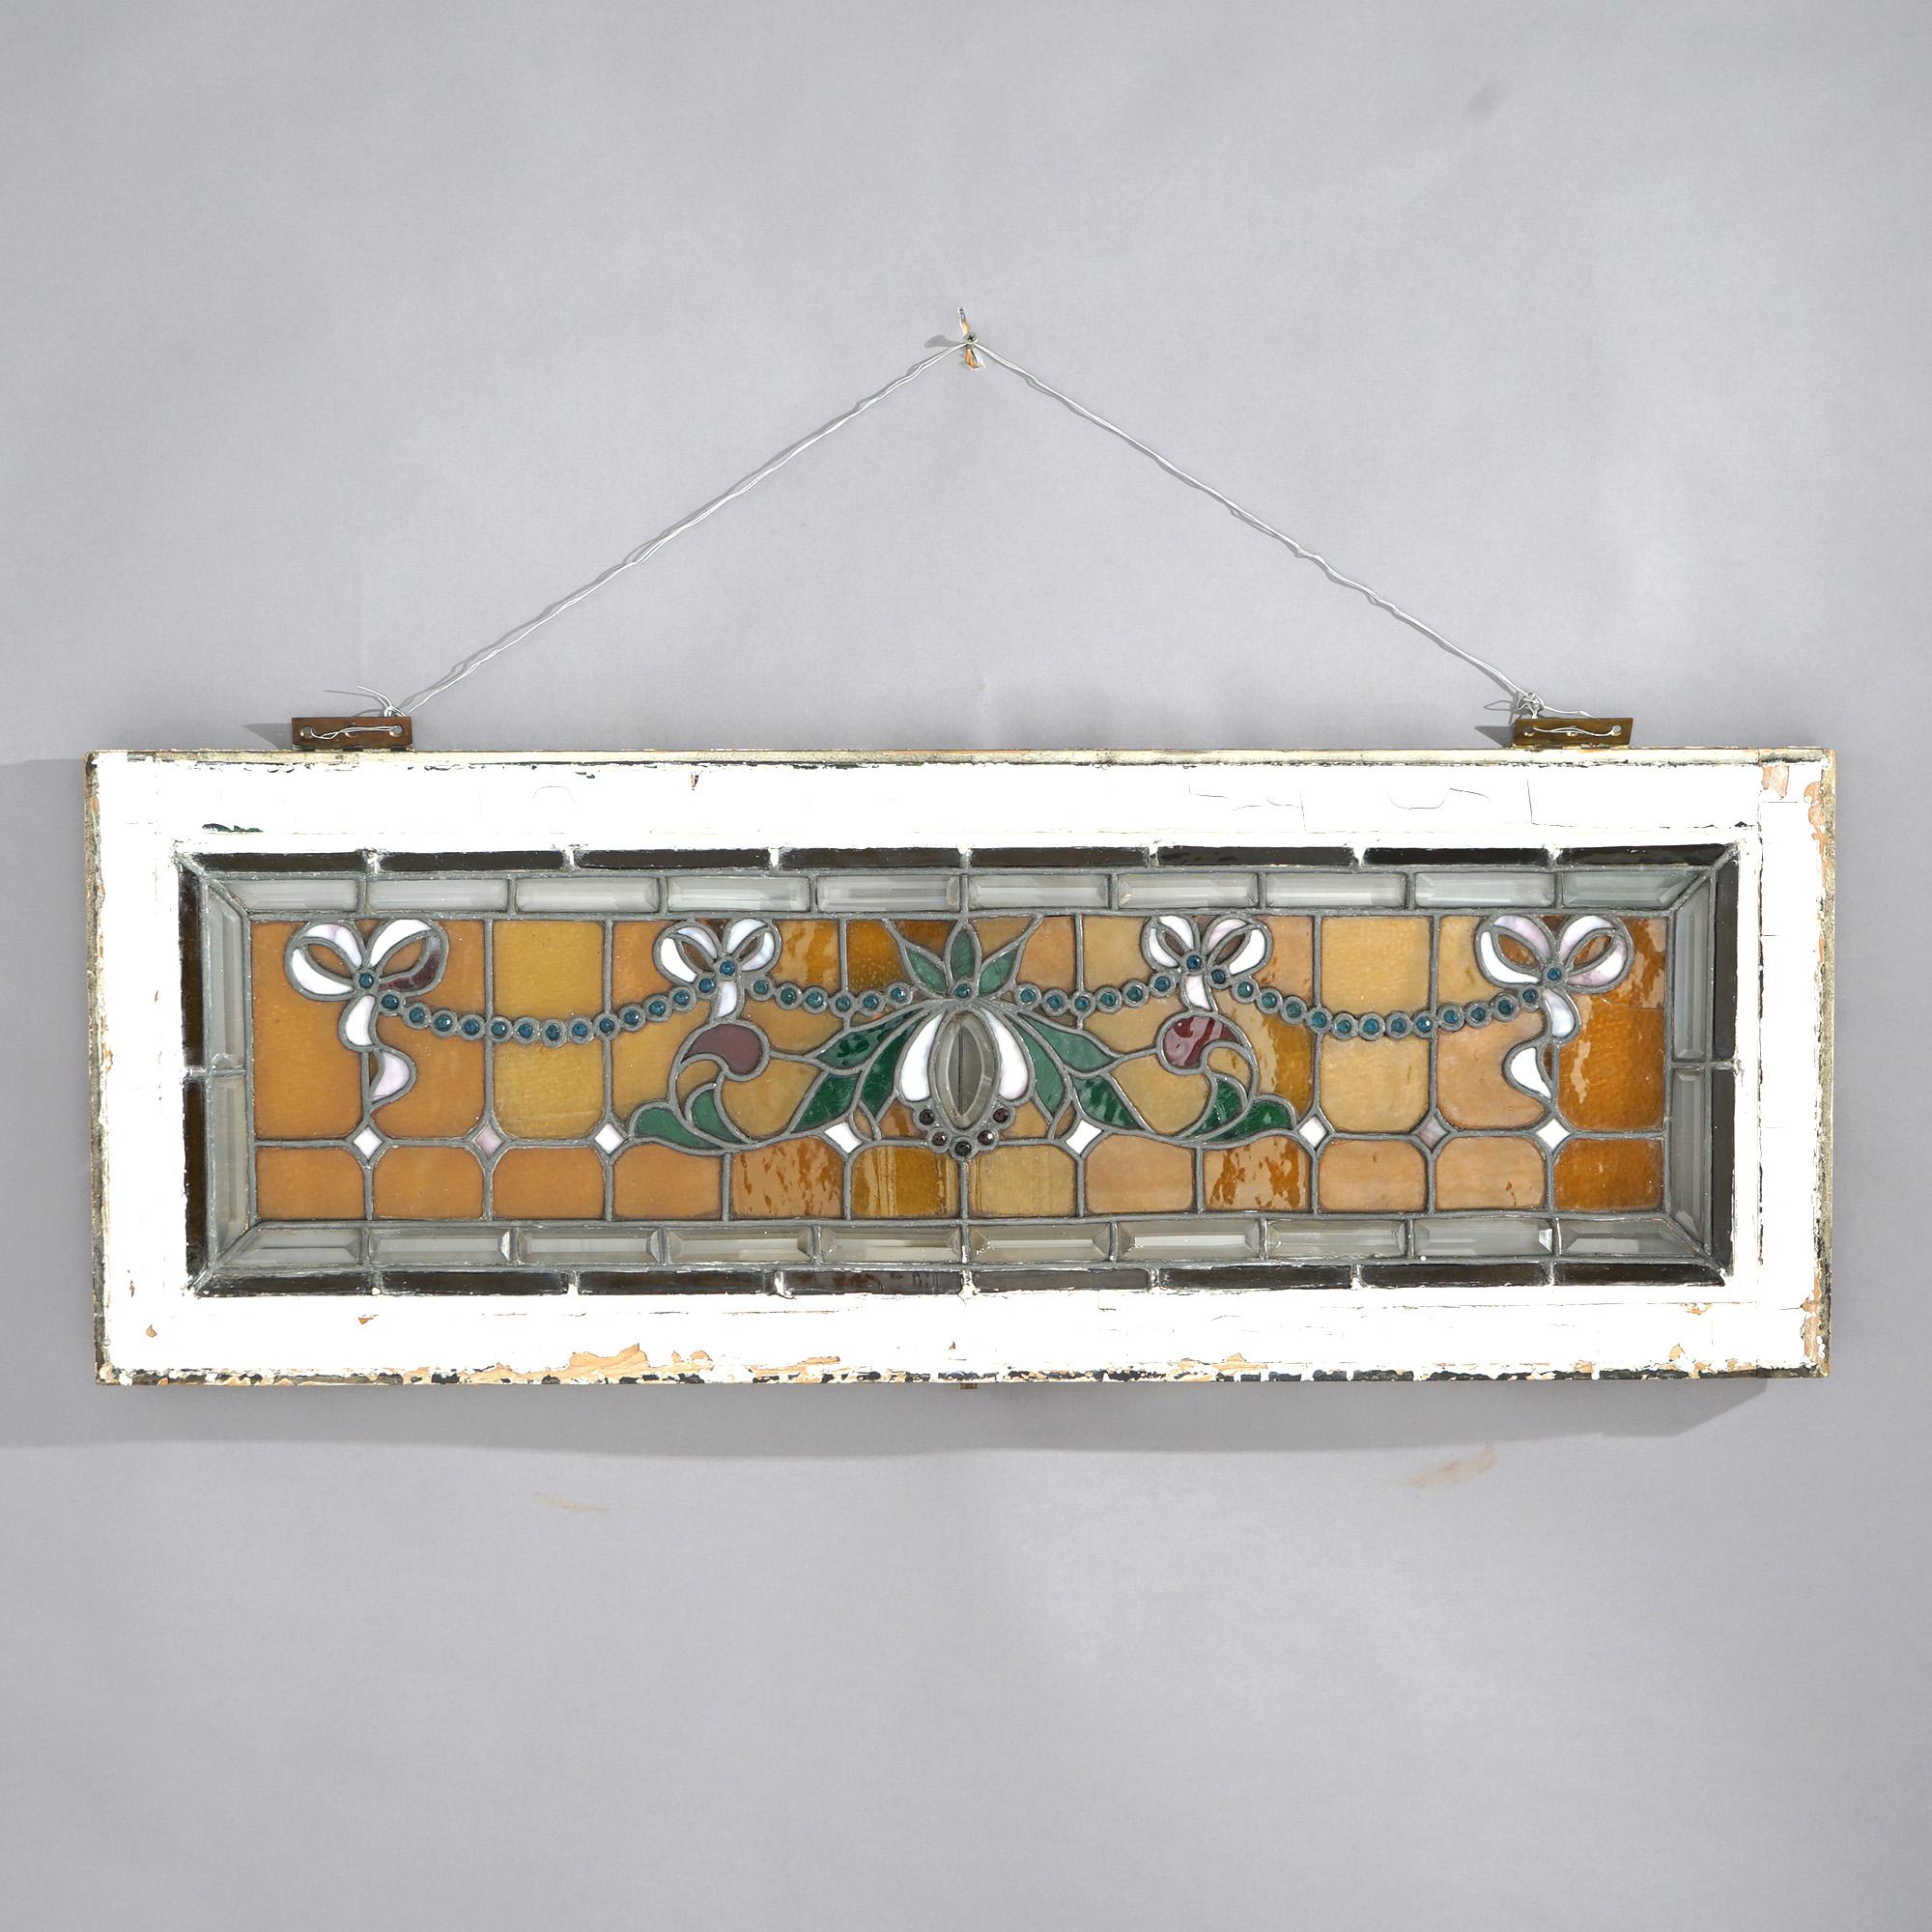 ***Ask About Discounted In-House Shipping***
An antique Arts & Crafts window offers leaded stained and jeweled glass in stylized floral and garland design seated in wood sash, c1910

Measures - 17